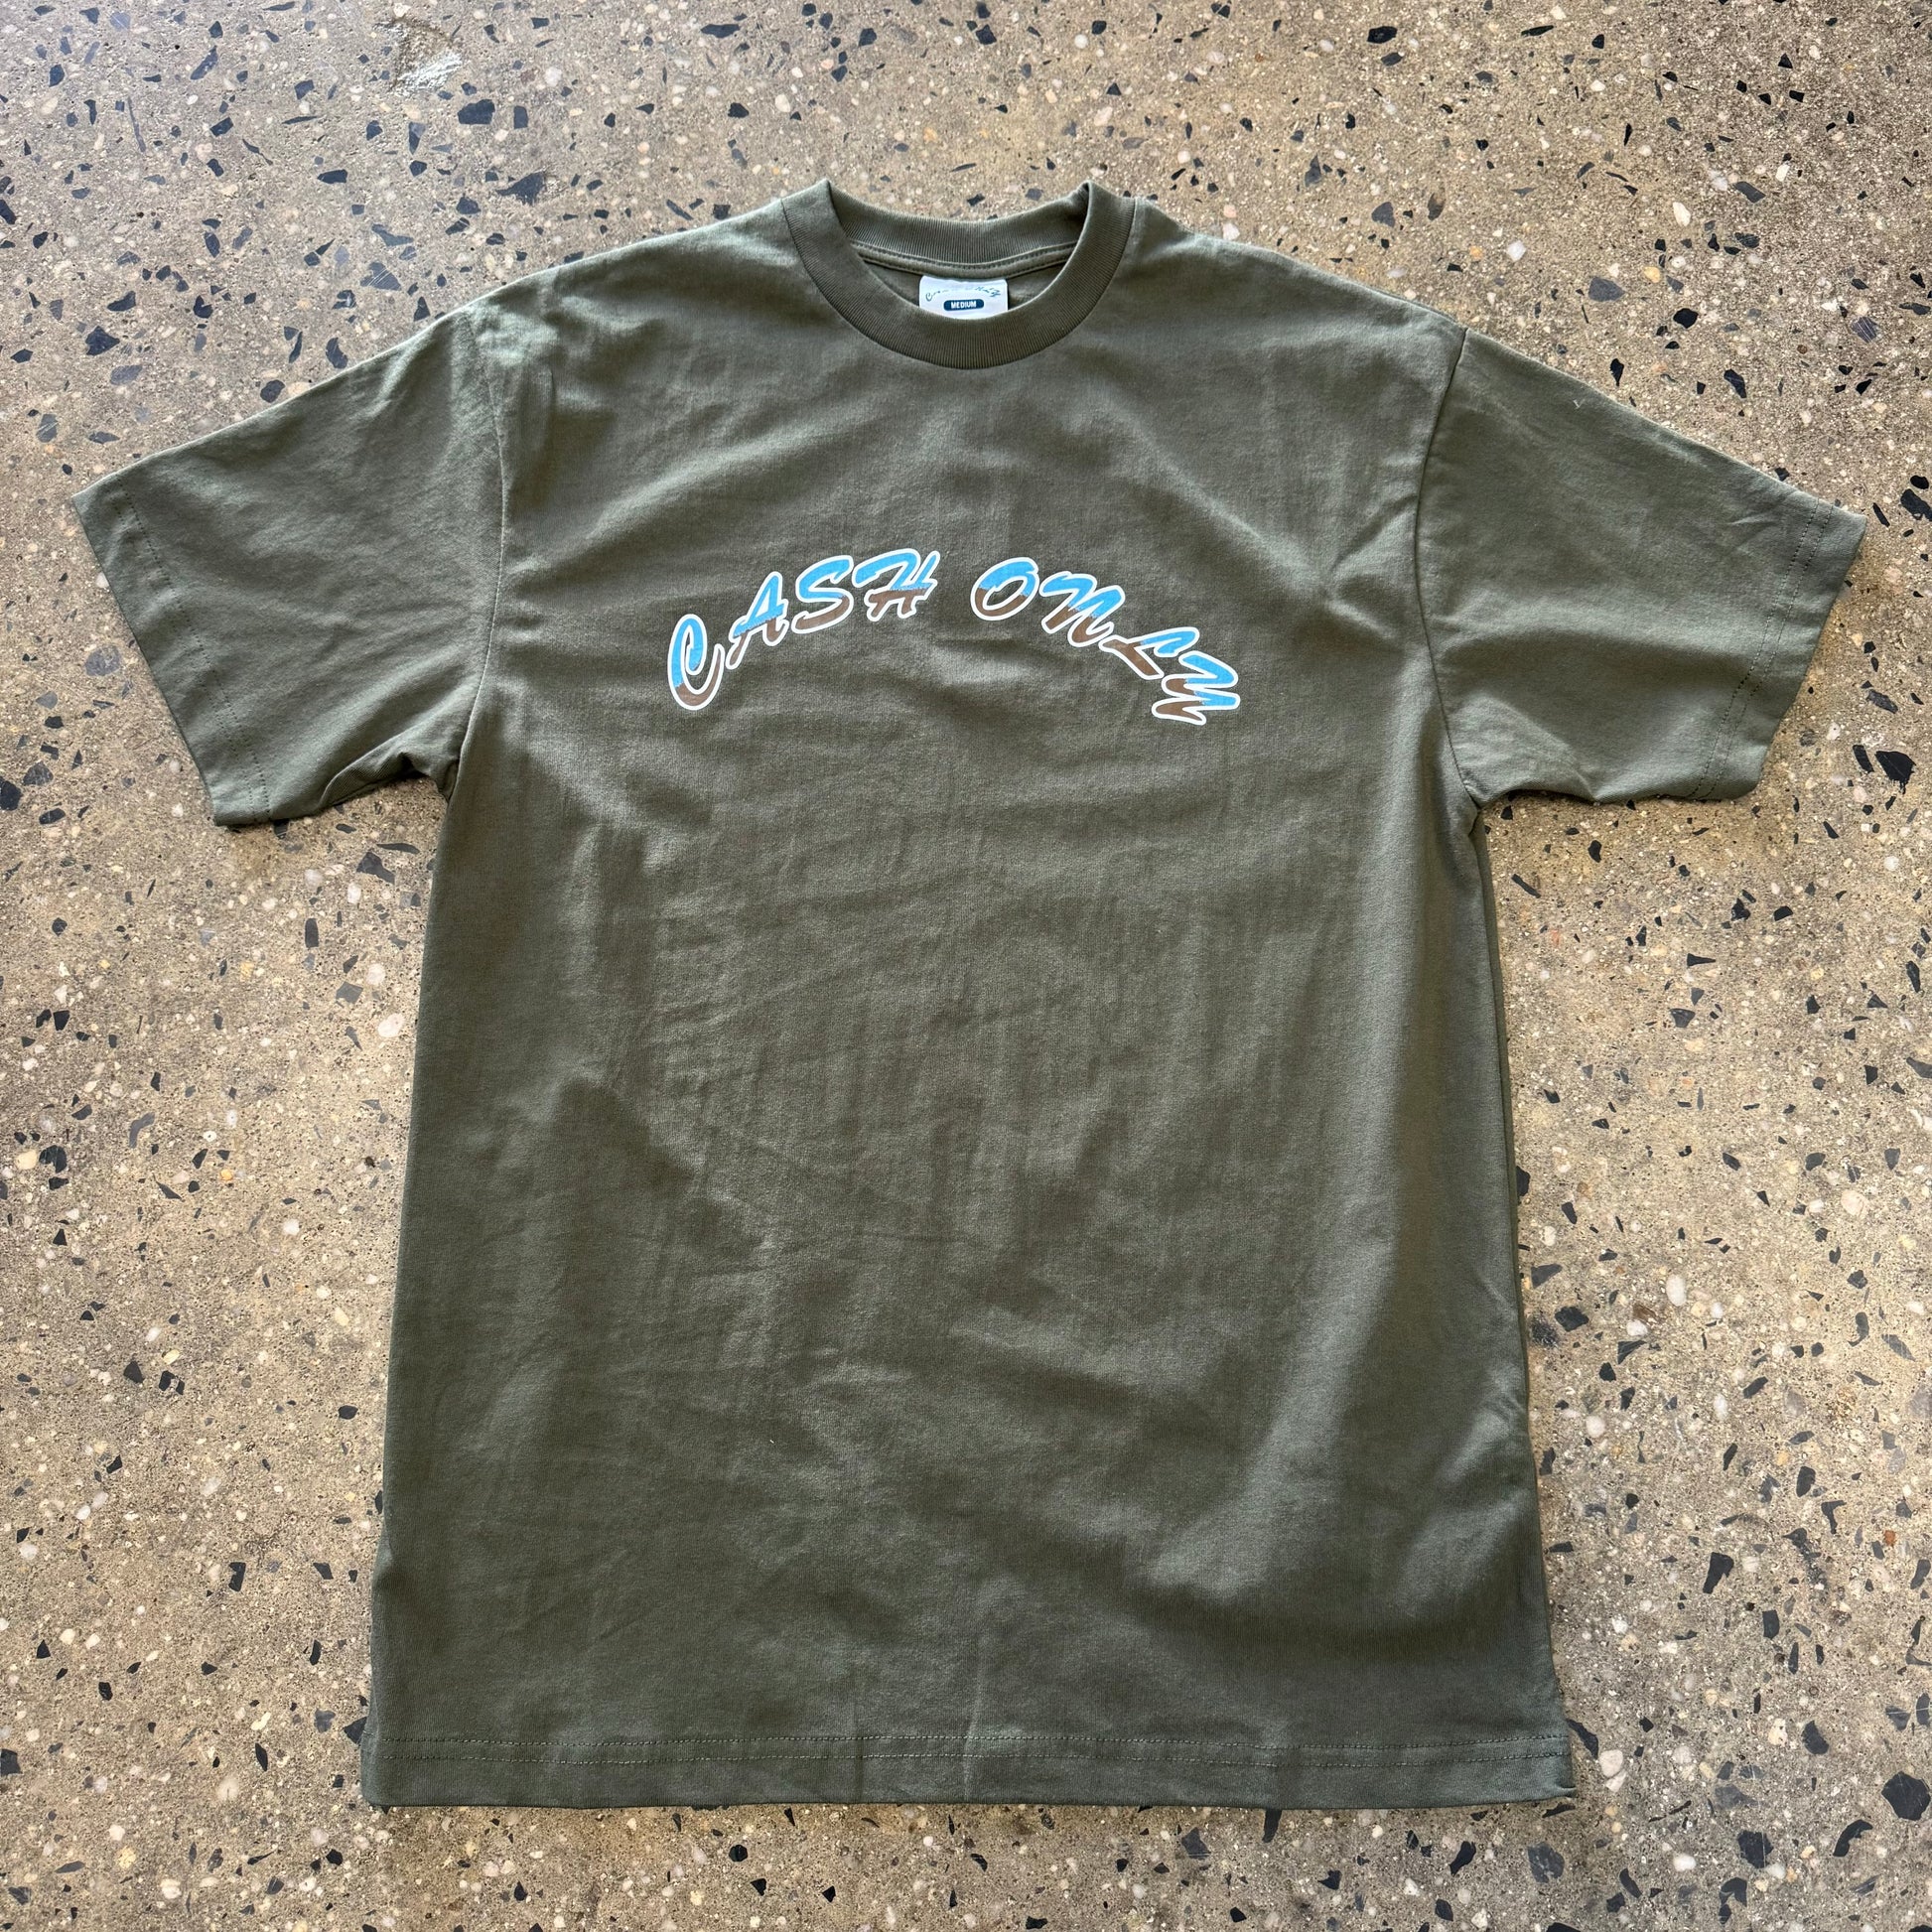 blue and brown cash only arch logo printed on army green t-shirt